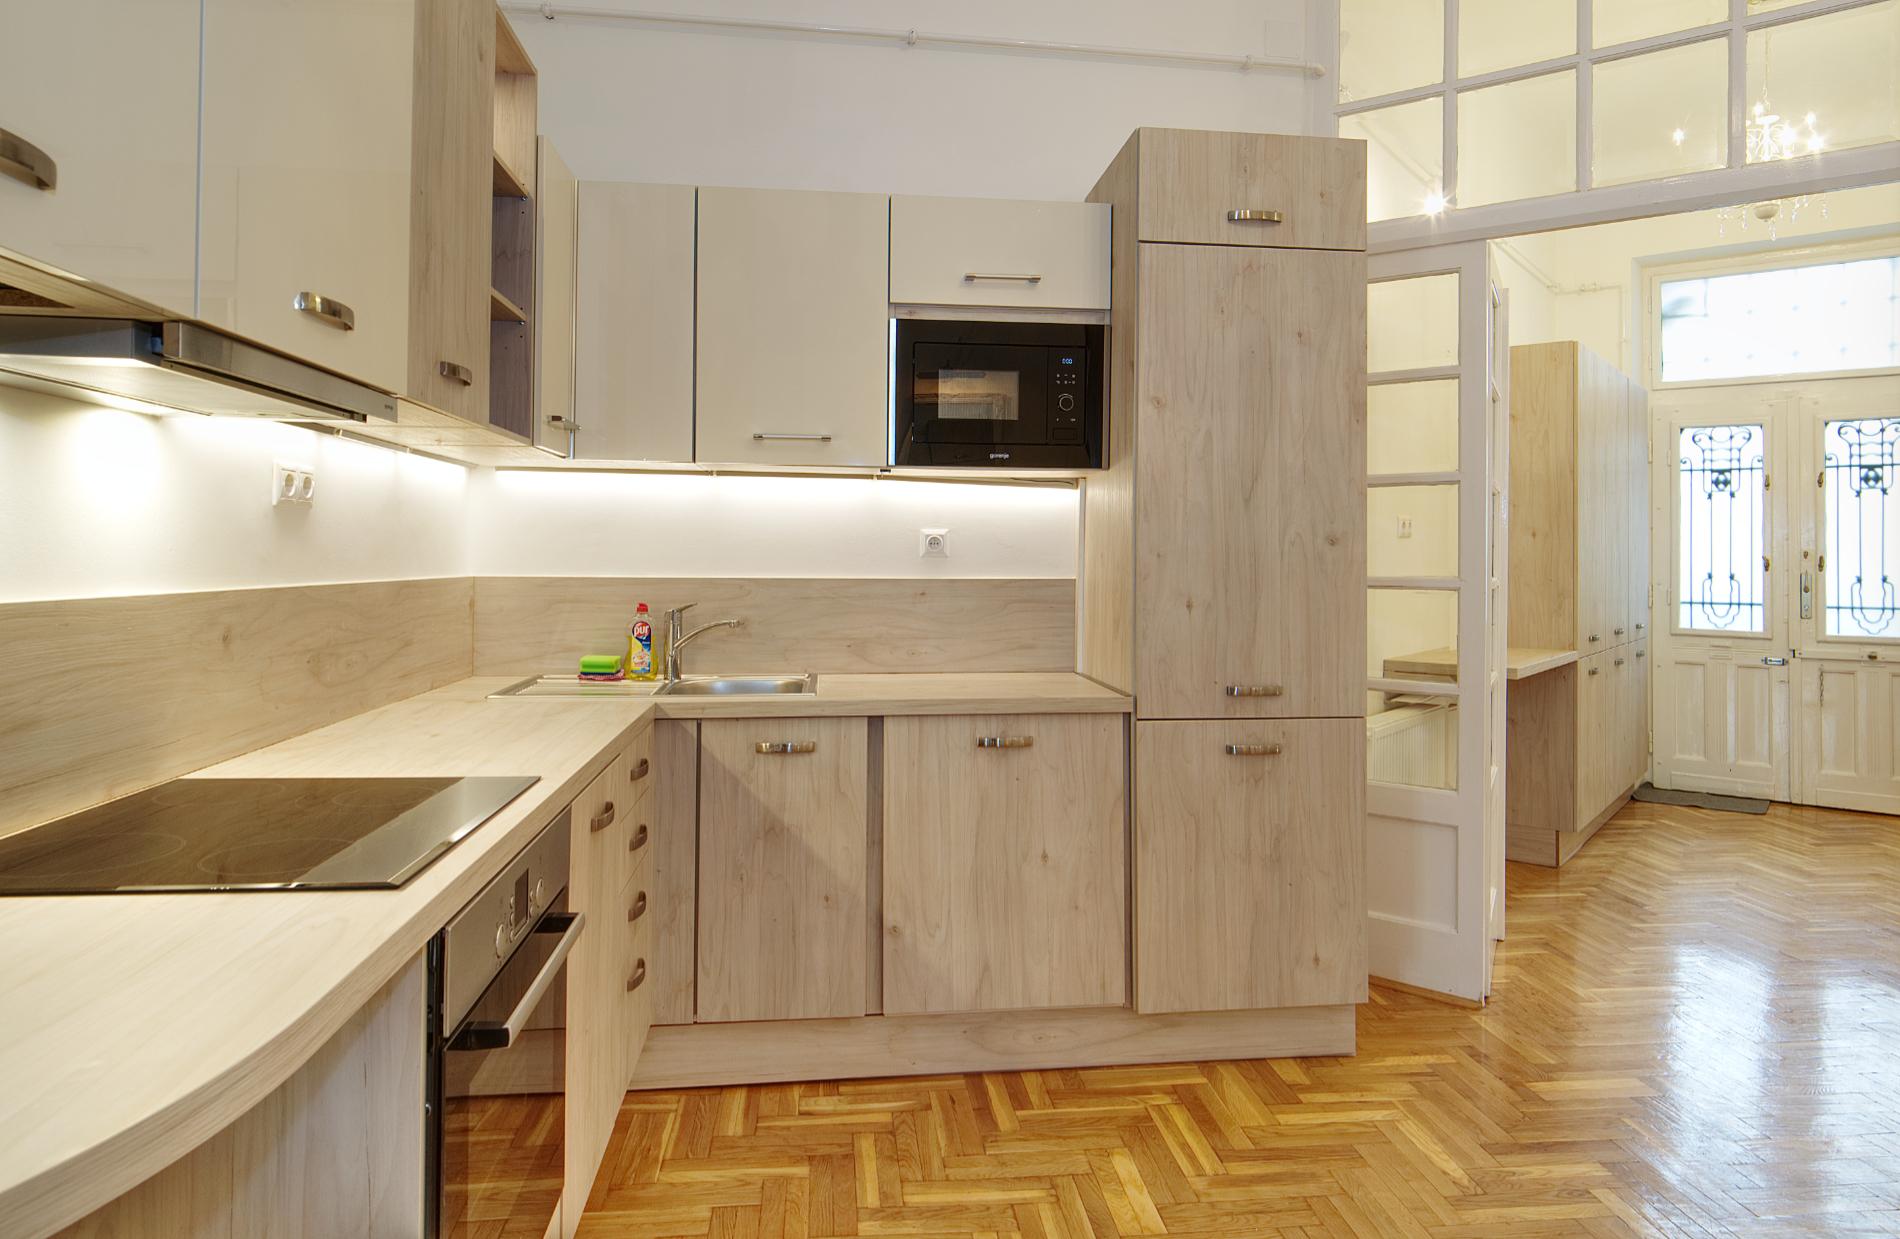 Kiraly - 3 bedroom flat in Budapest